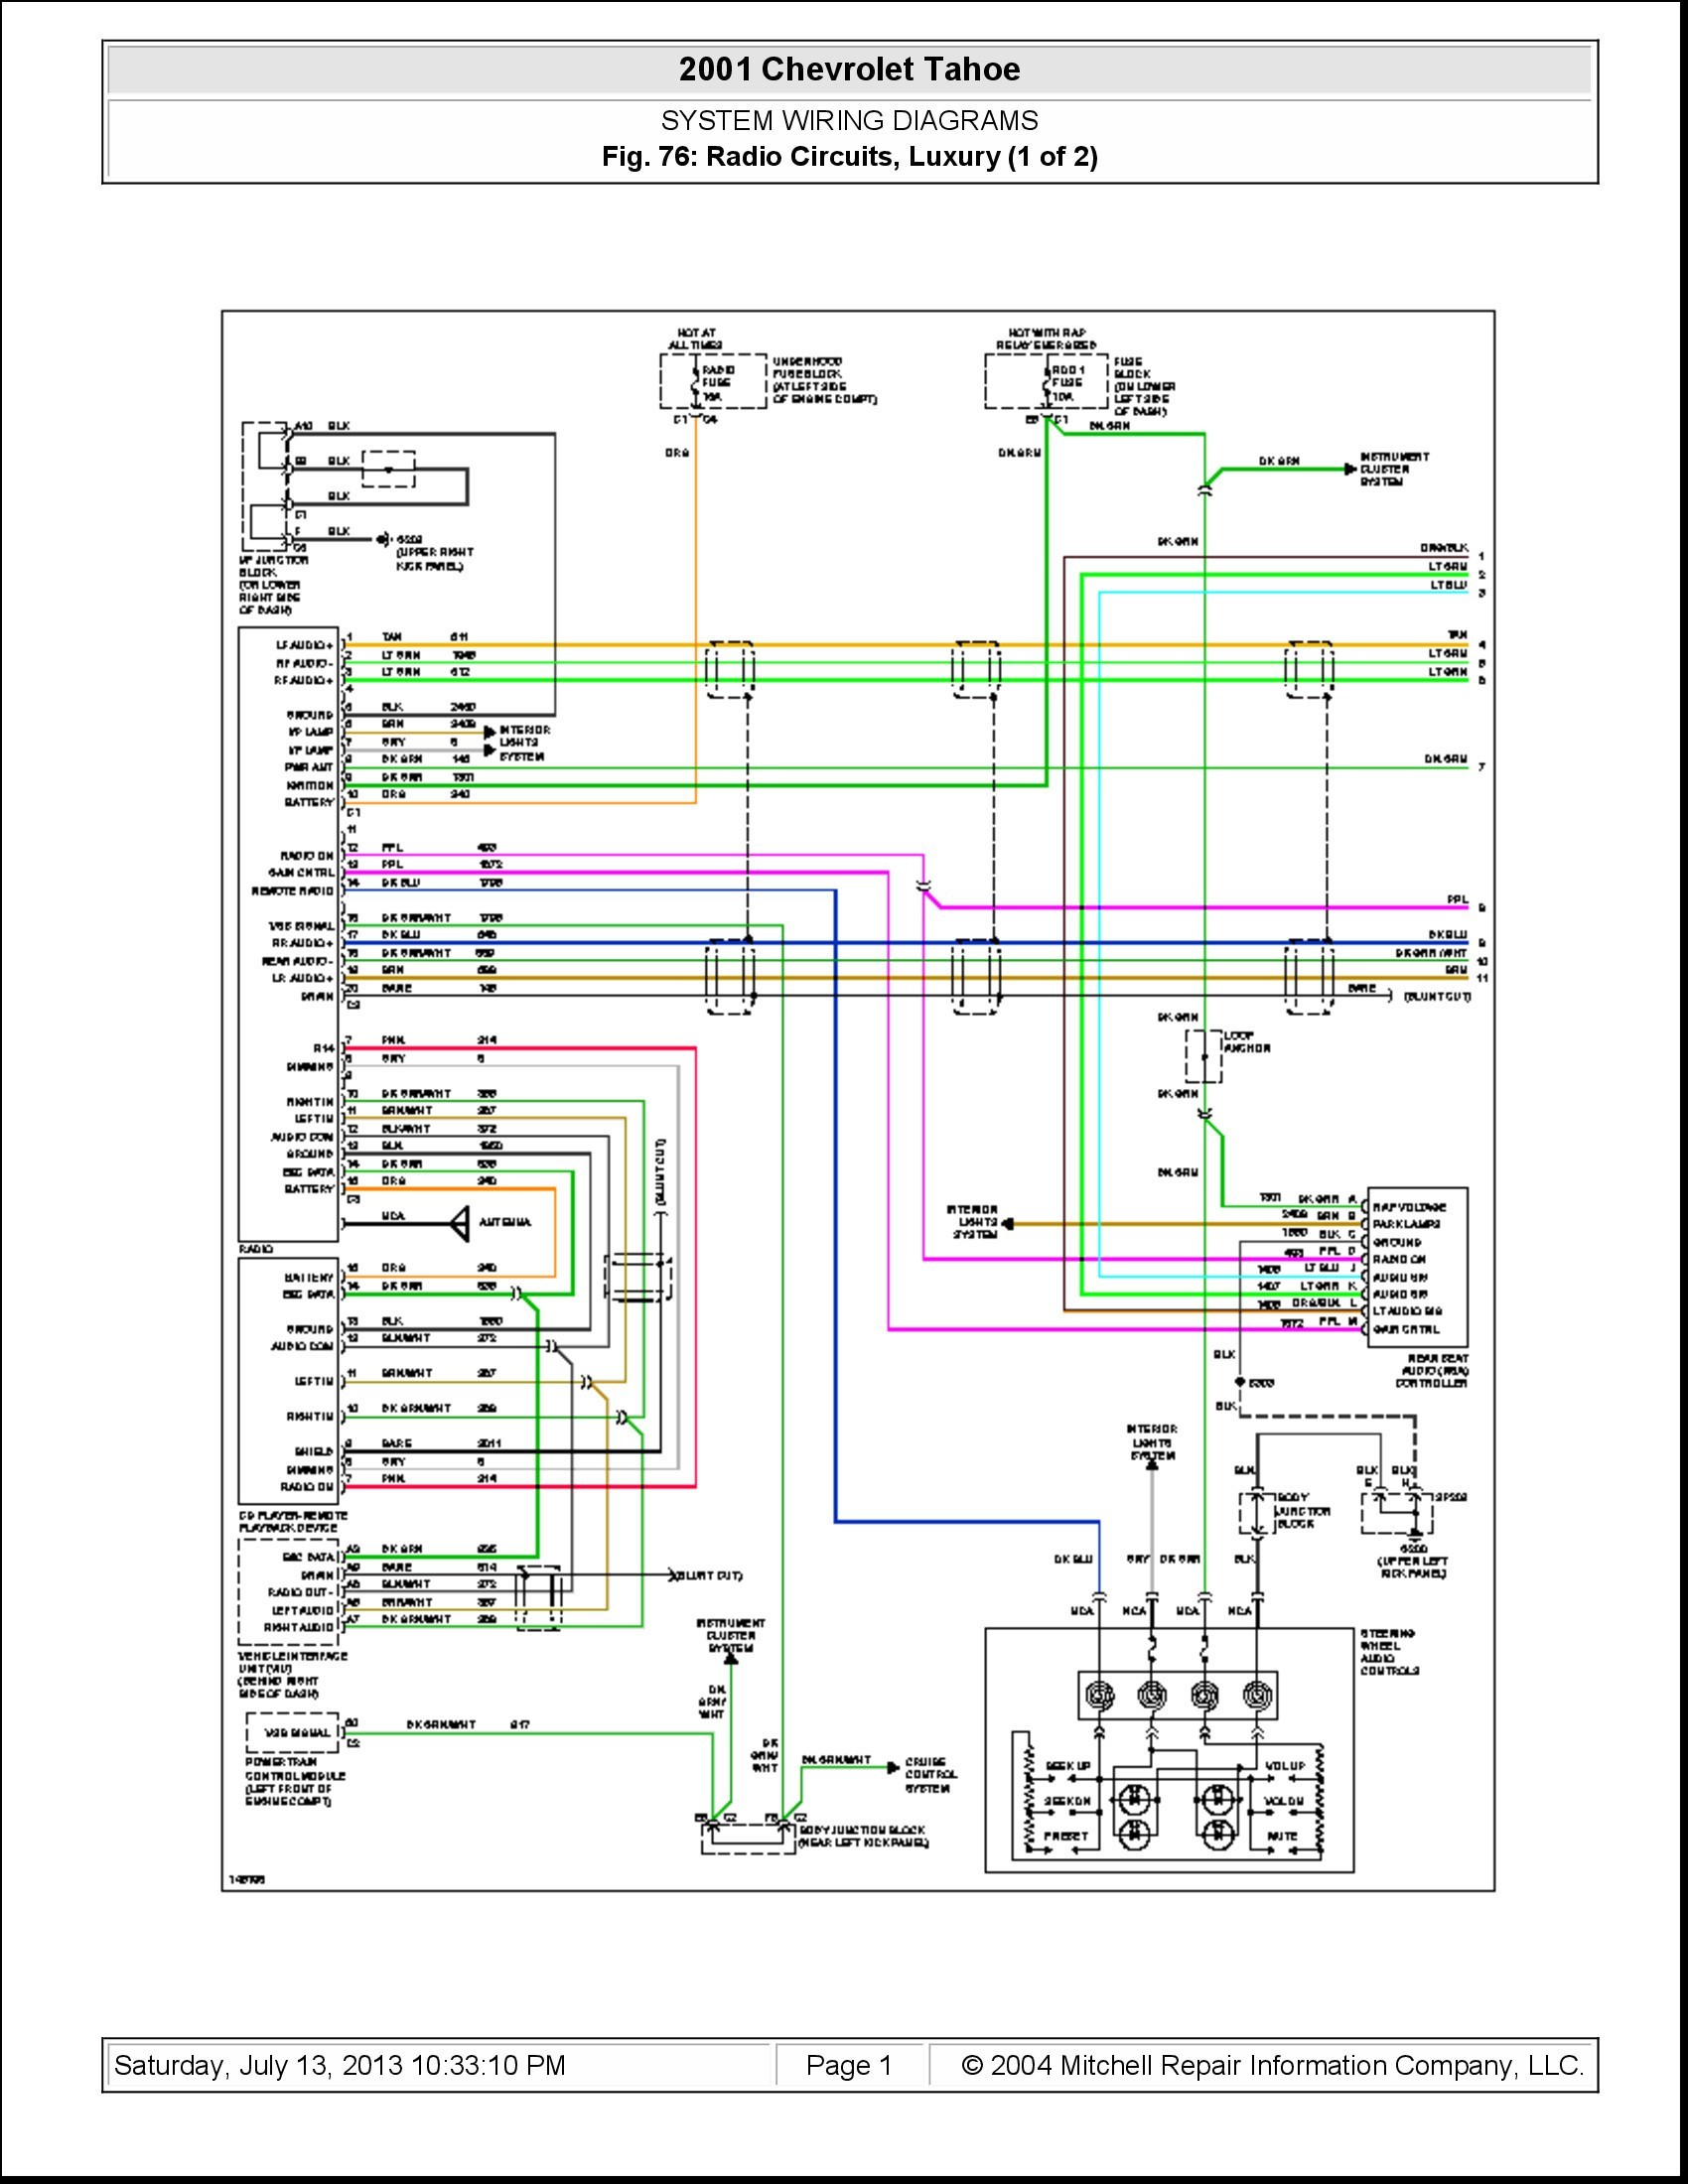 2001 Chevy S10 Engine Diagram Chevy S10 Wiring Schematic Wiring Diagram toolbox Of 2001 Chevy S10 Engine Diagram